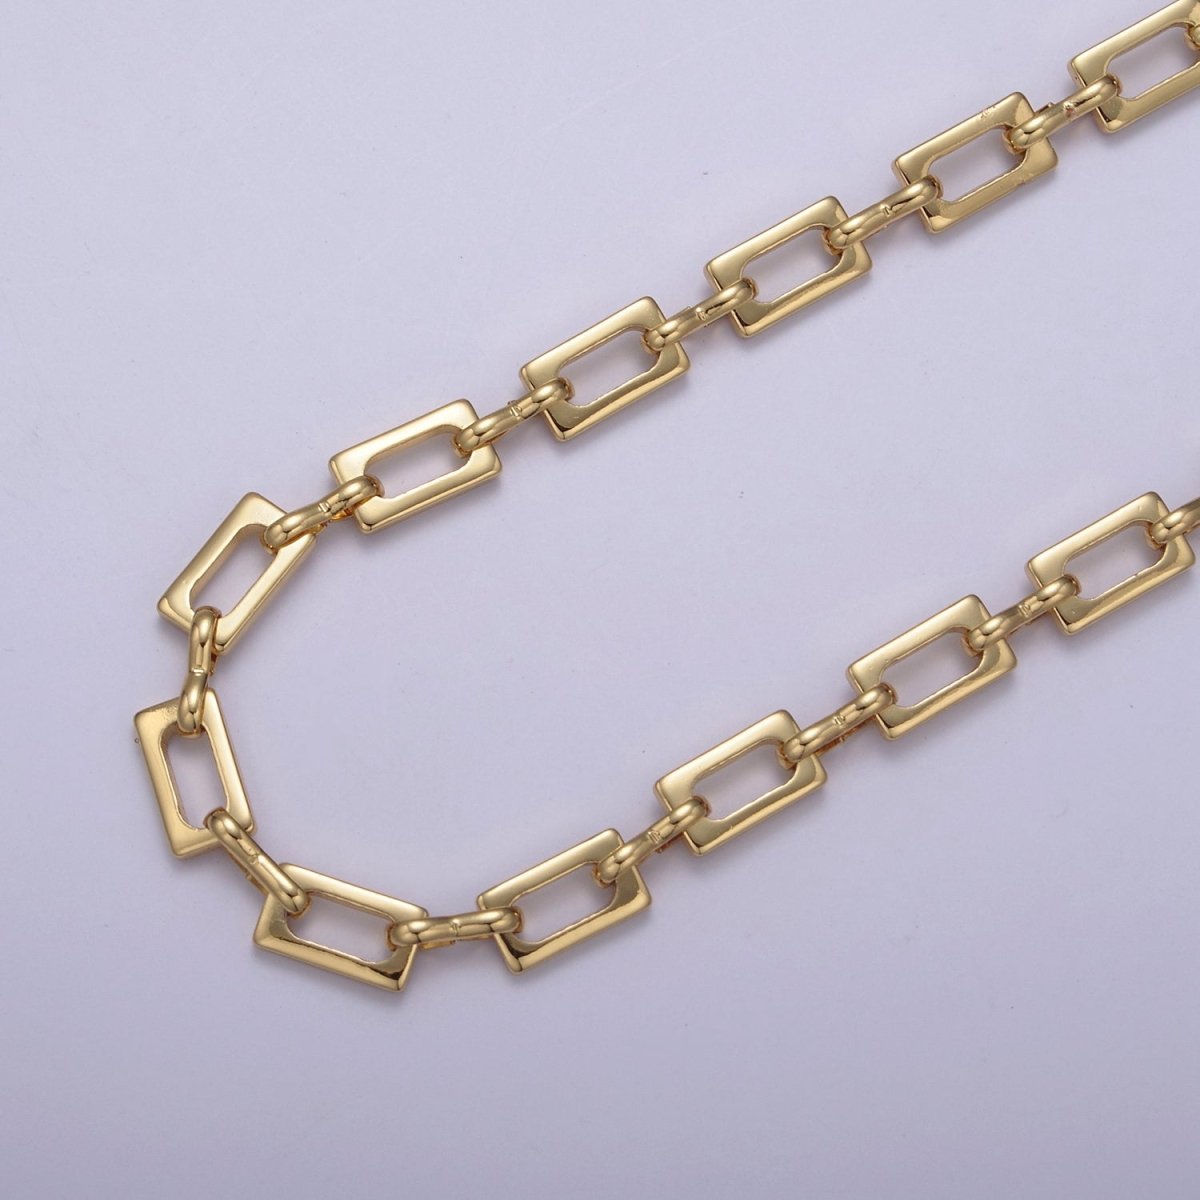 24K Gold Filled Unique Unfinished Chain For Jewelry Making, 9.8X5.5mm Width Rectangle Paper Clip Chain with 3.3mm Figure Eight Link | ROLL-647 Clearance Pricing - DLUXCA